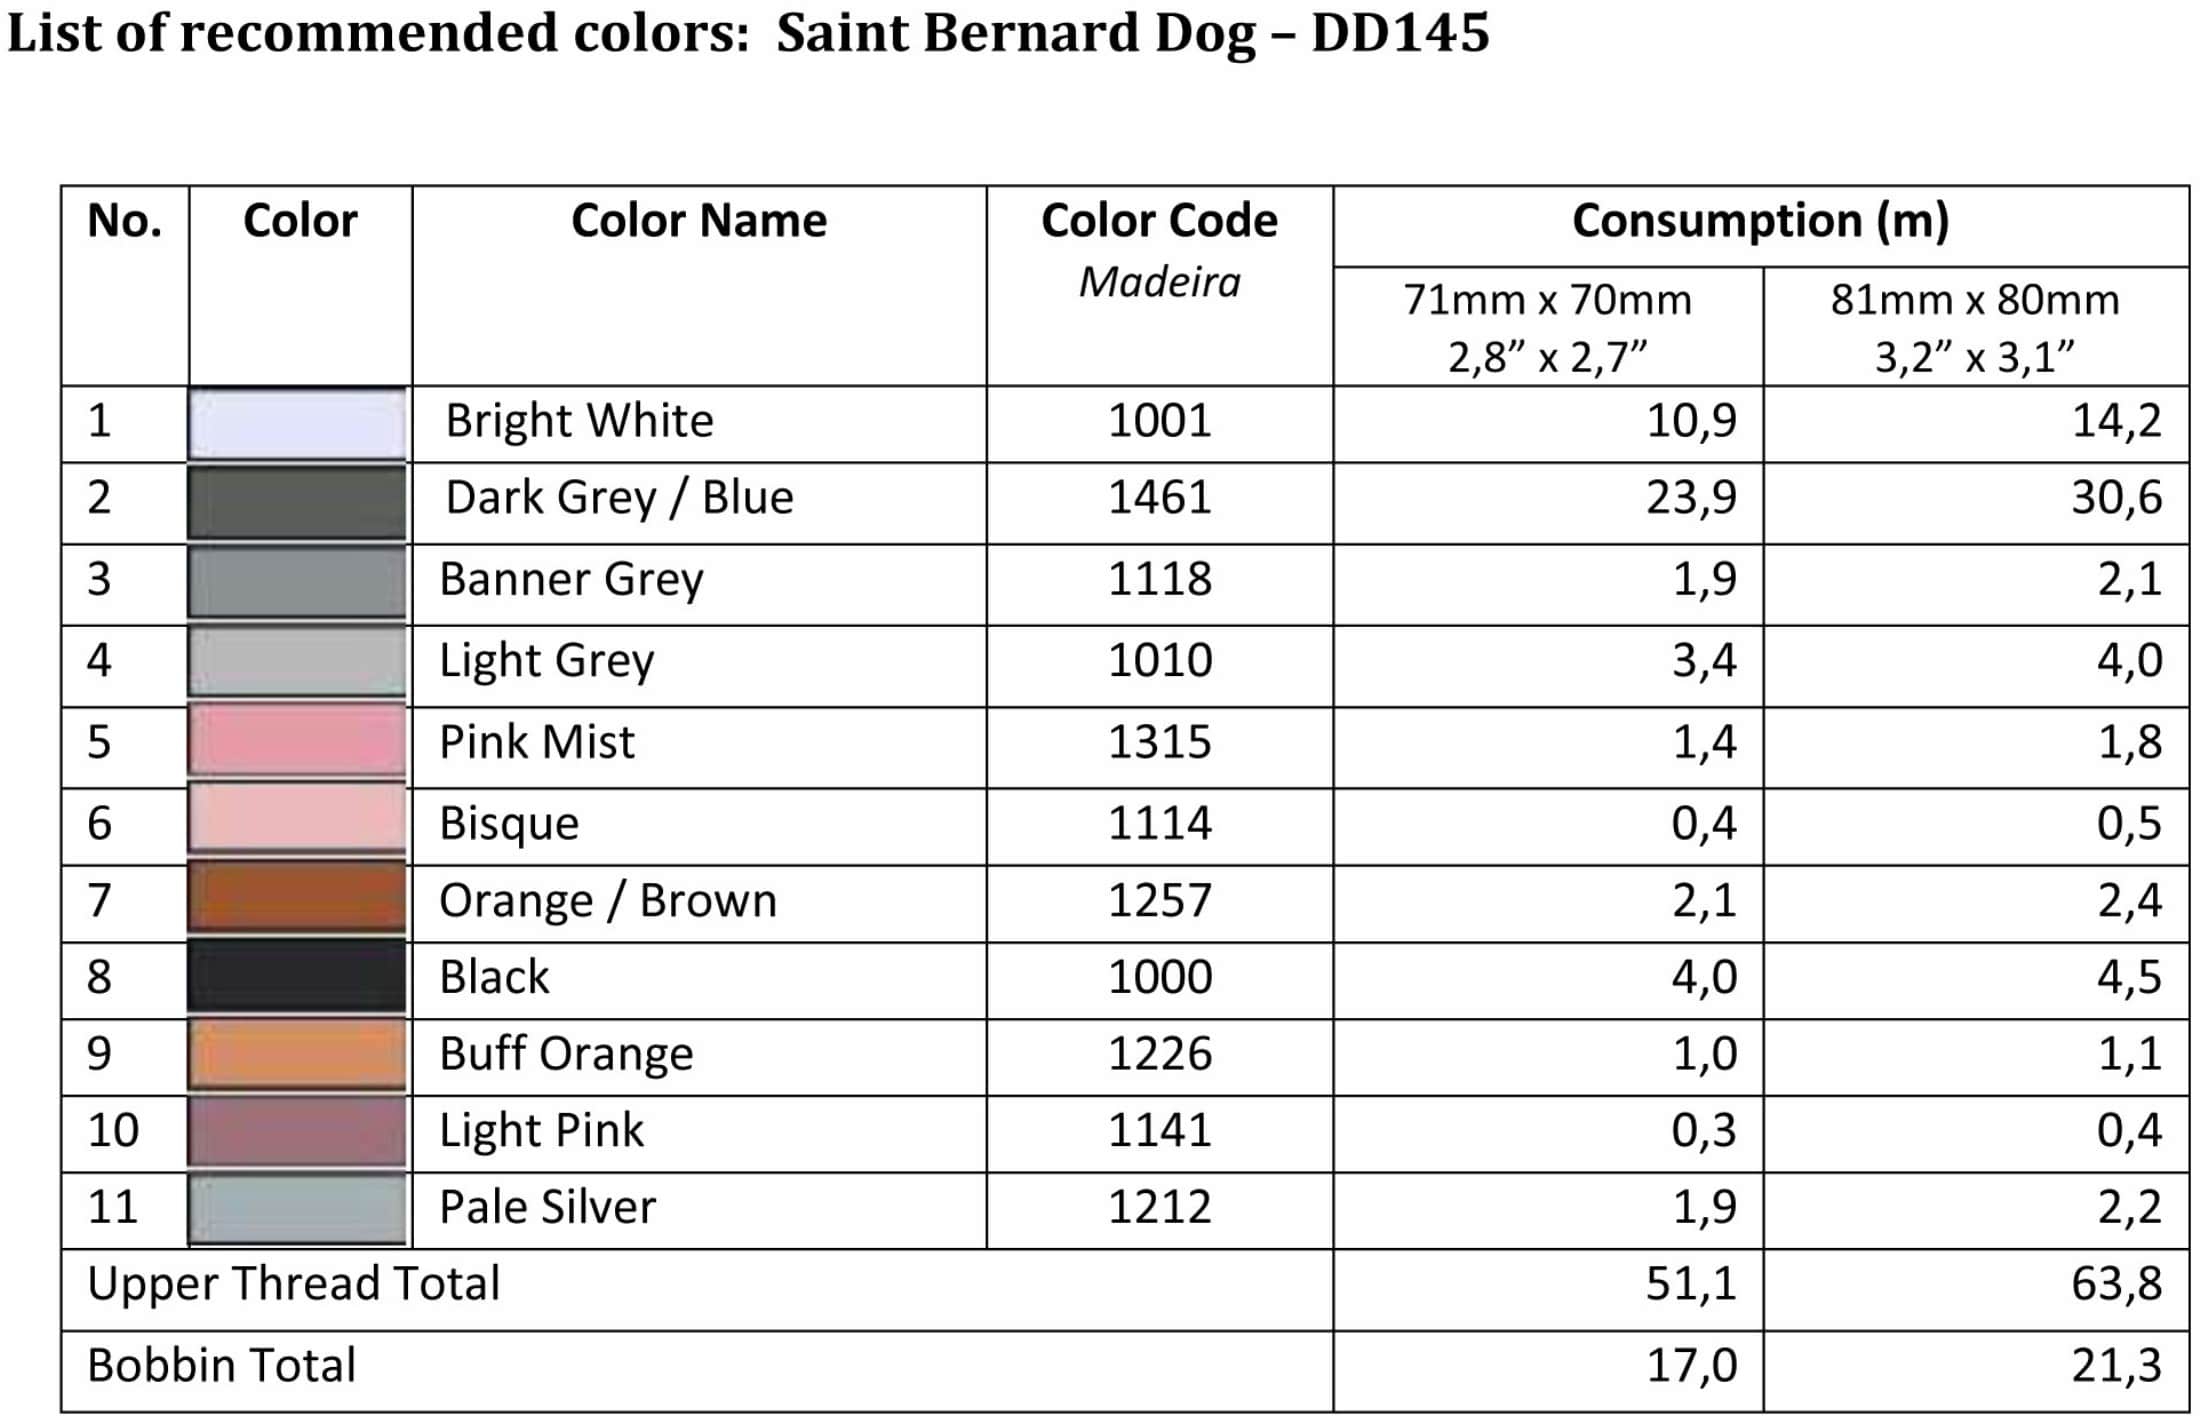 List of recommended colors - LargeDD145